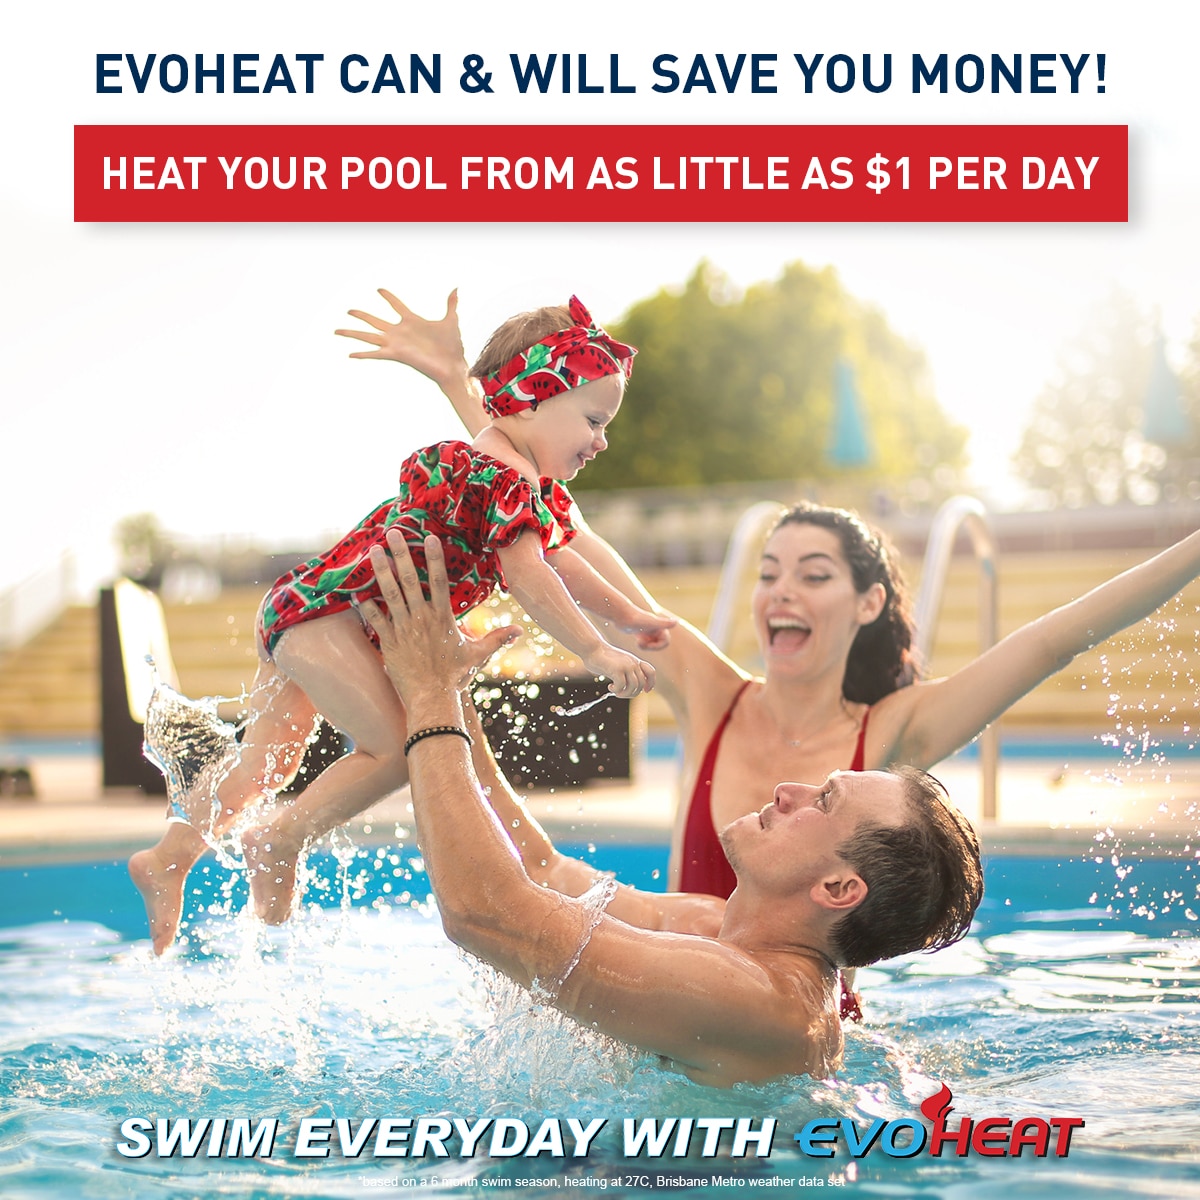 Heat Your Pool for $1